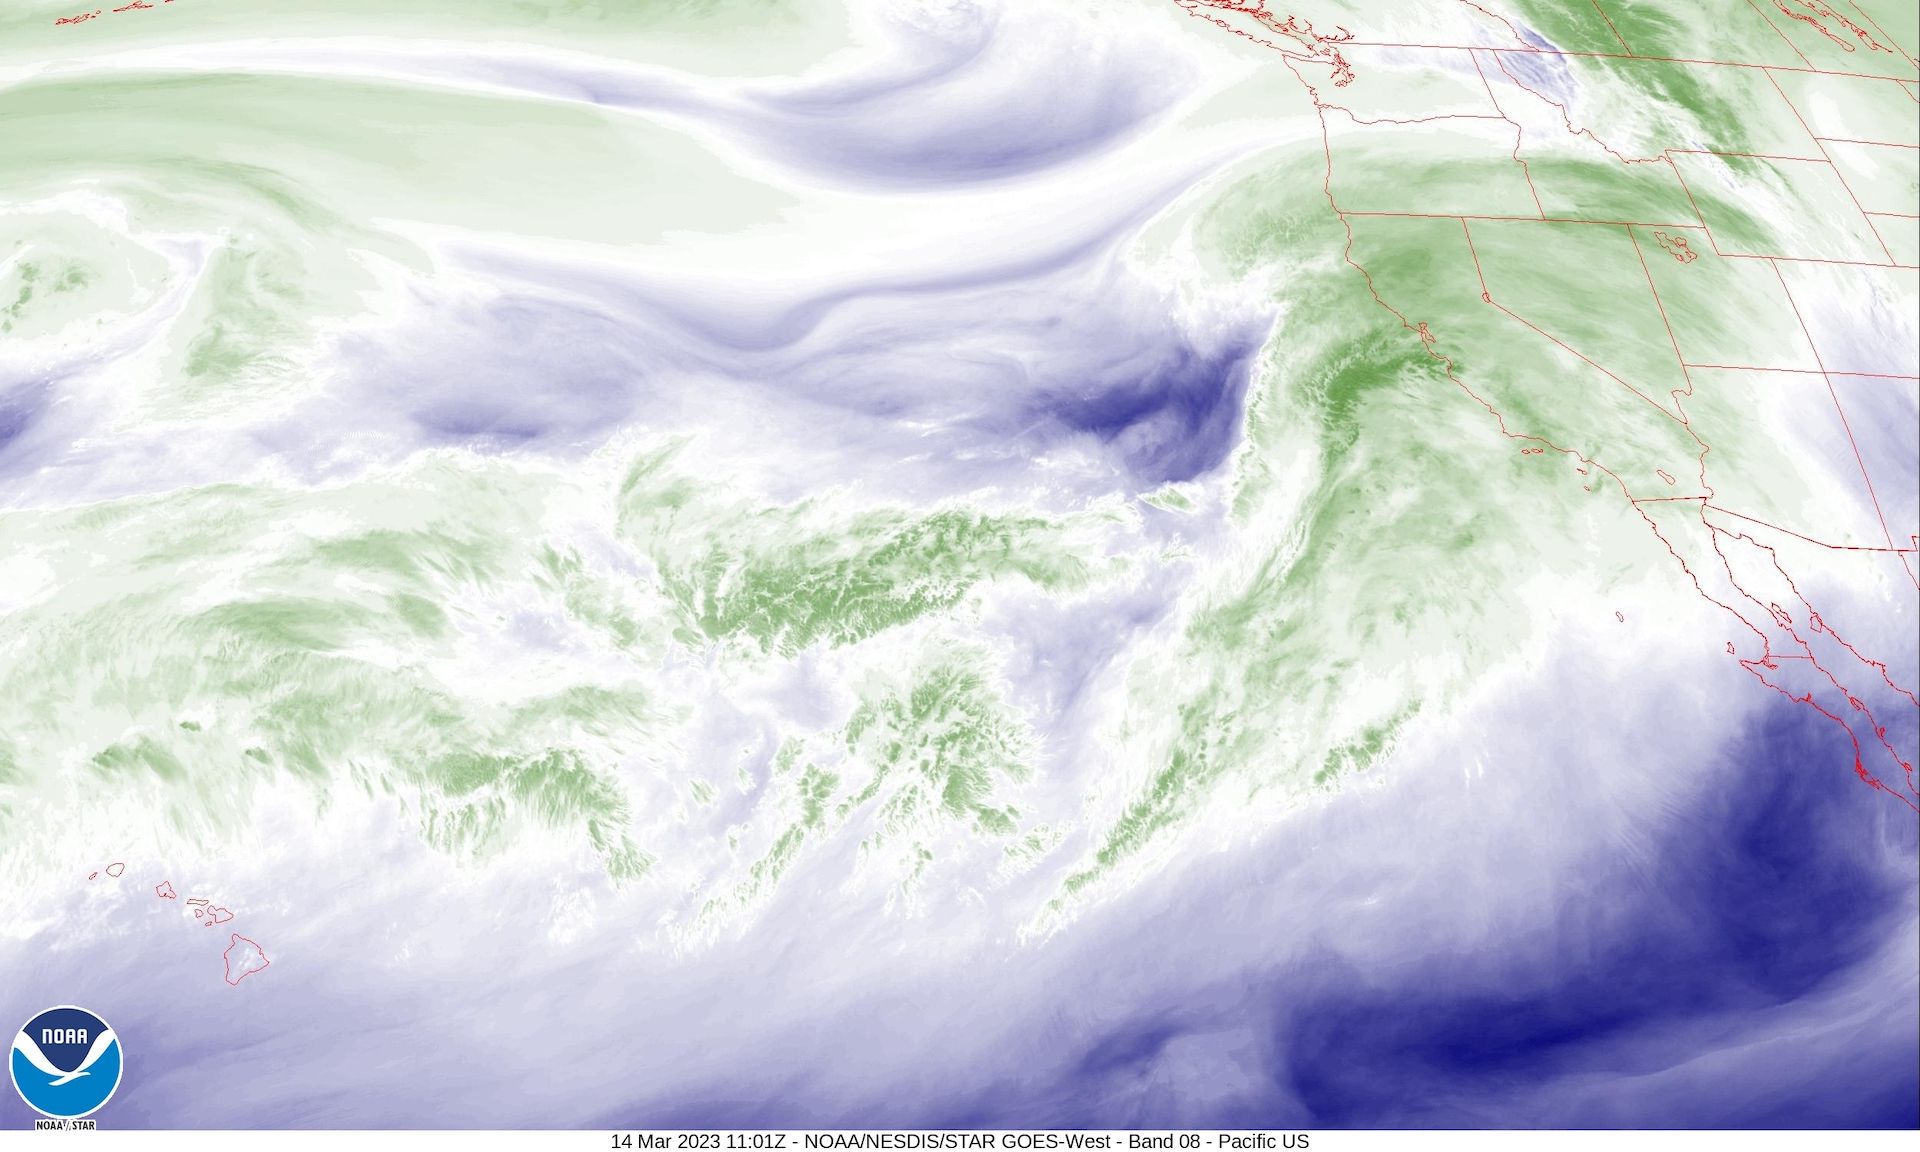 Satellite image showing an atmospheric river event taking aim at California.